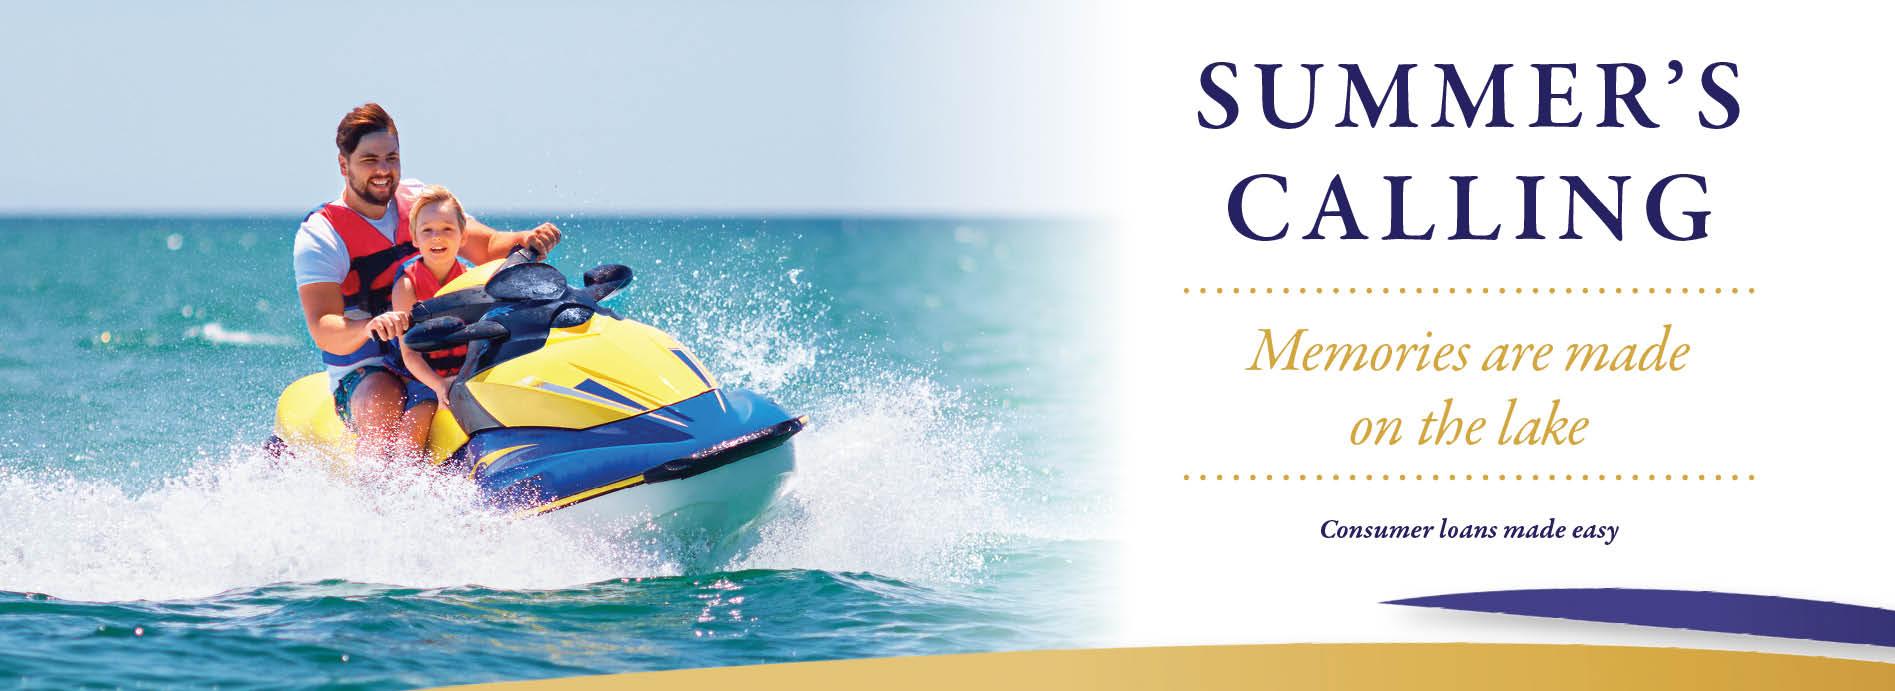 Summer's Calling.  Memories are made on the lake.  Consumer loans made easy.  Image of a man and child on a jetski.